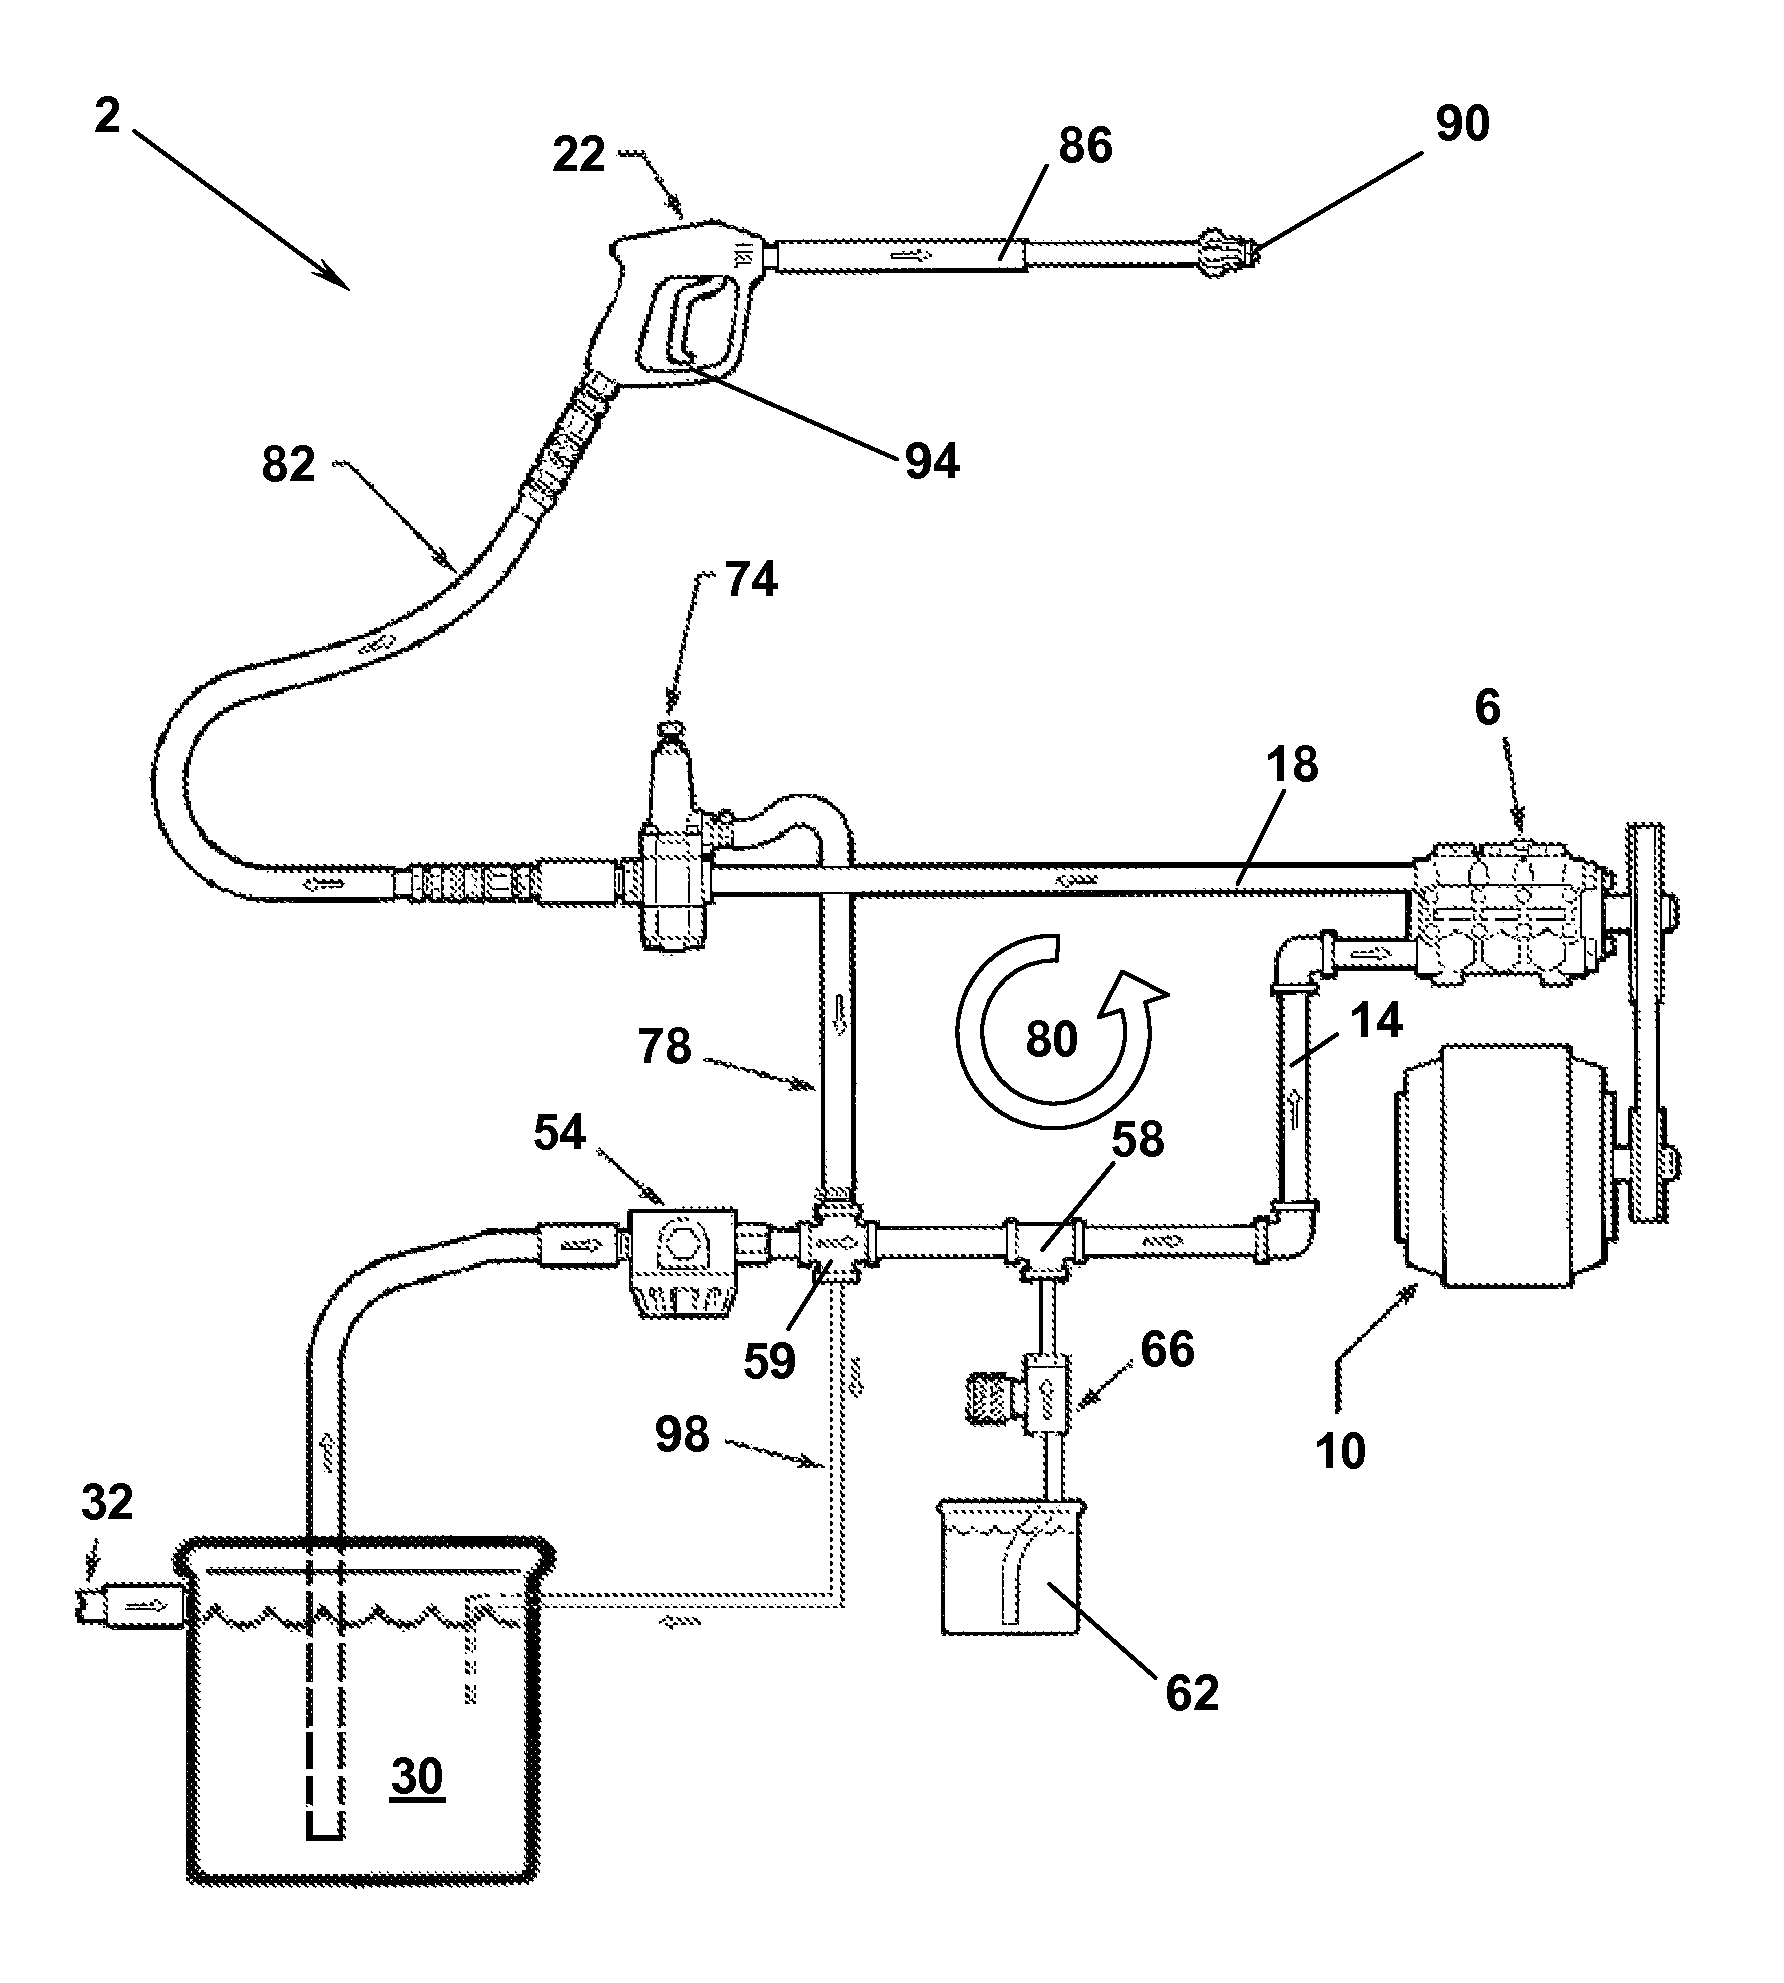 Pressure washer device employing a cool bypass